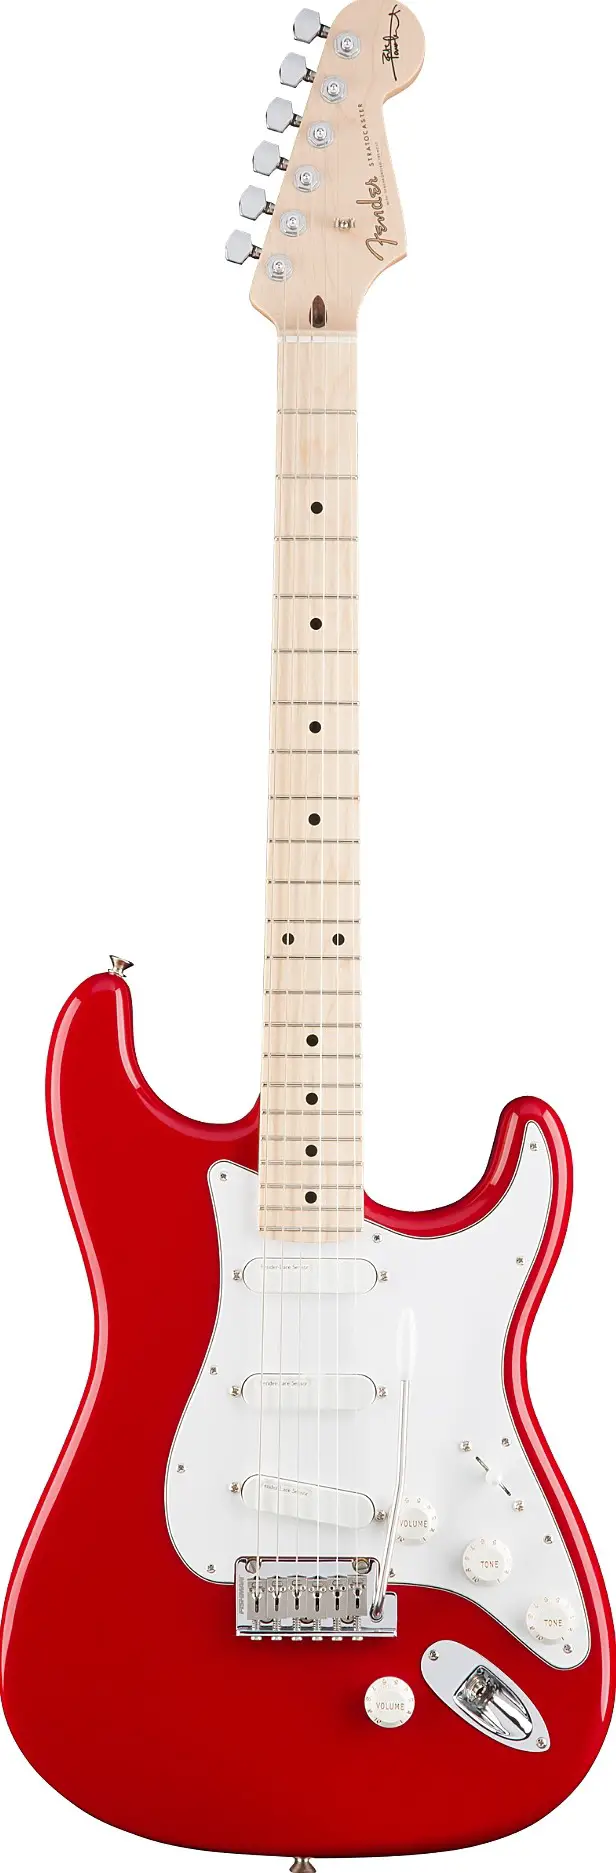 Limited Edition Pete Townshend Stratocaster by Fender Custom Shop